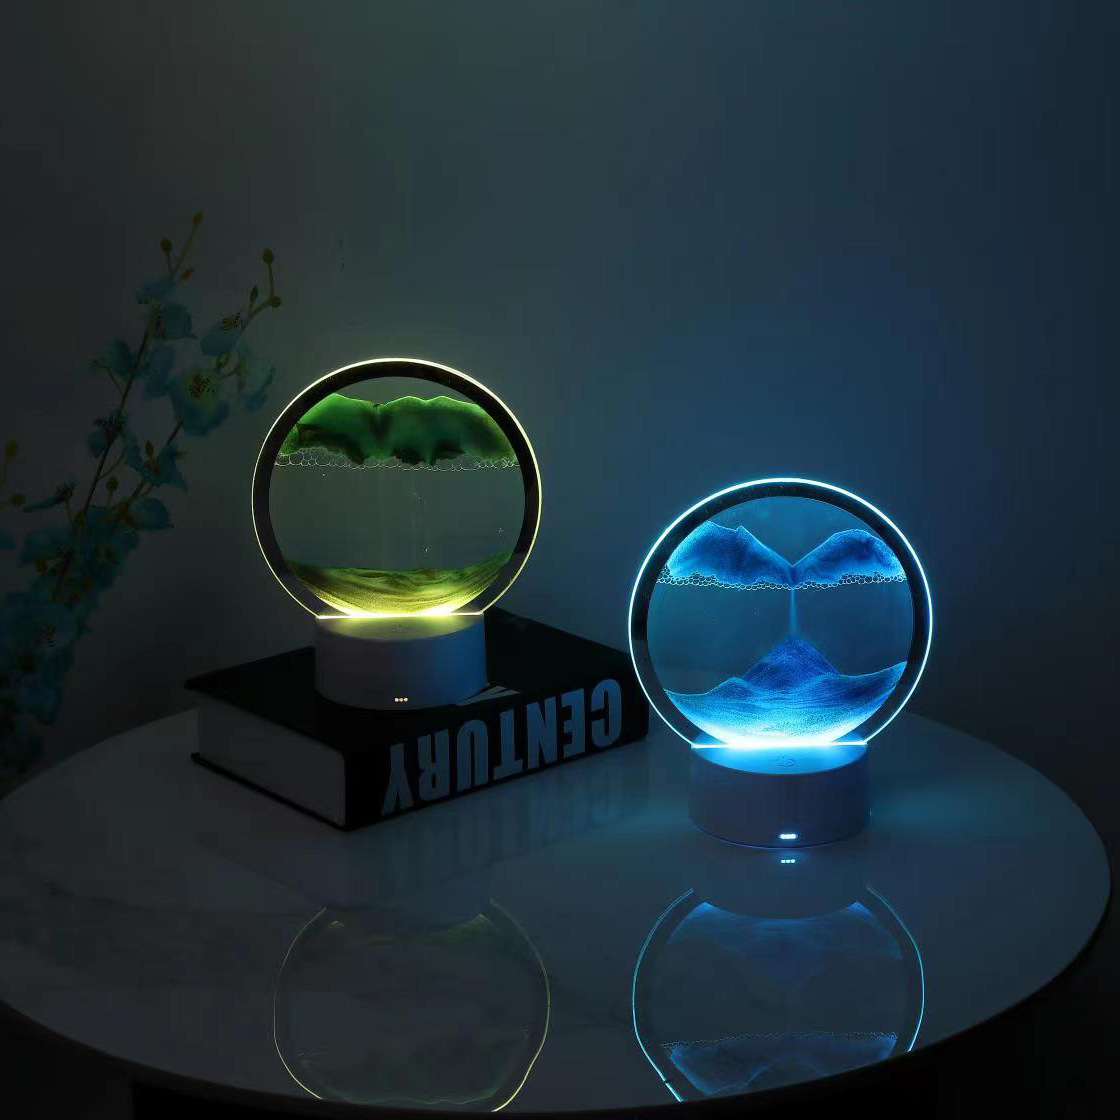 Hourglass RGB / 16 / 7 Small LED Table Lamp Moving 3D Sand Art Picture Quicksand Painting Table Lamp Room Decor Lamp Table